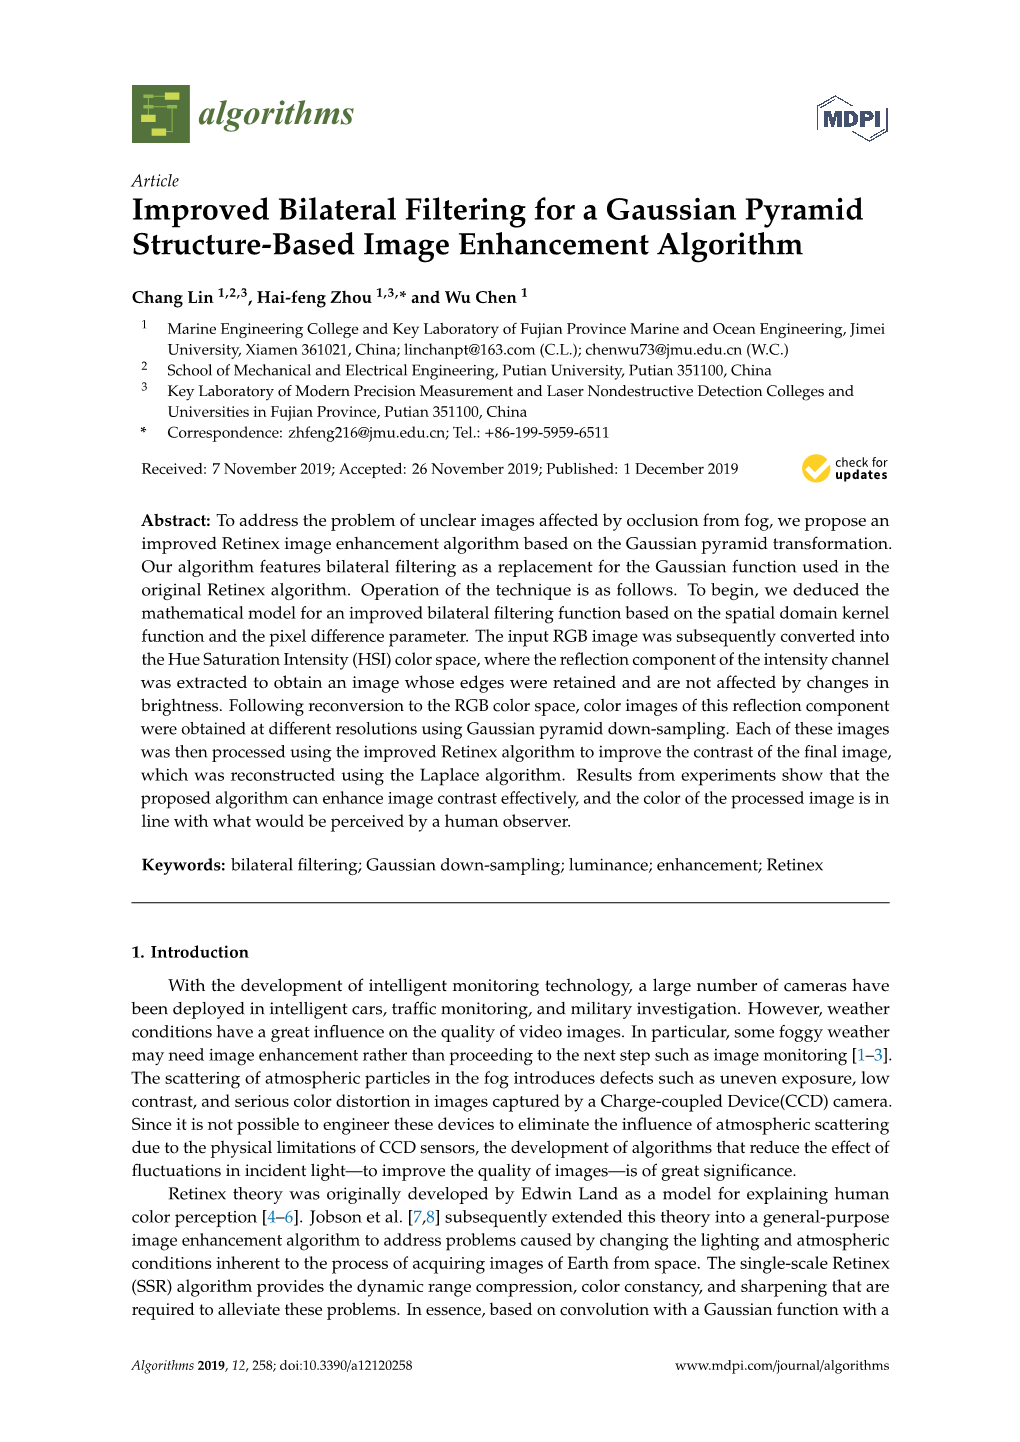 Improved Bilateral Filtering for a Gaussian Pyramid Structure-Based Image Enhancement Algorithm